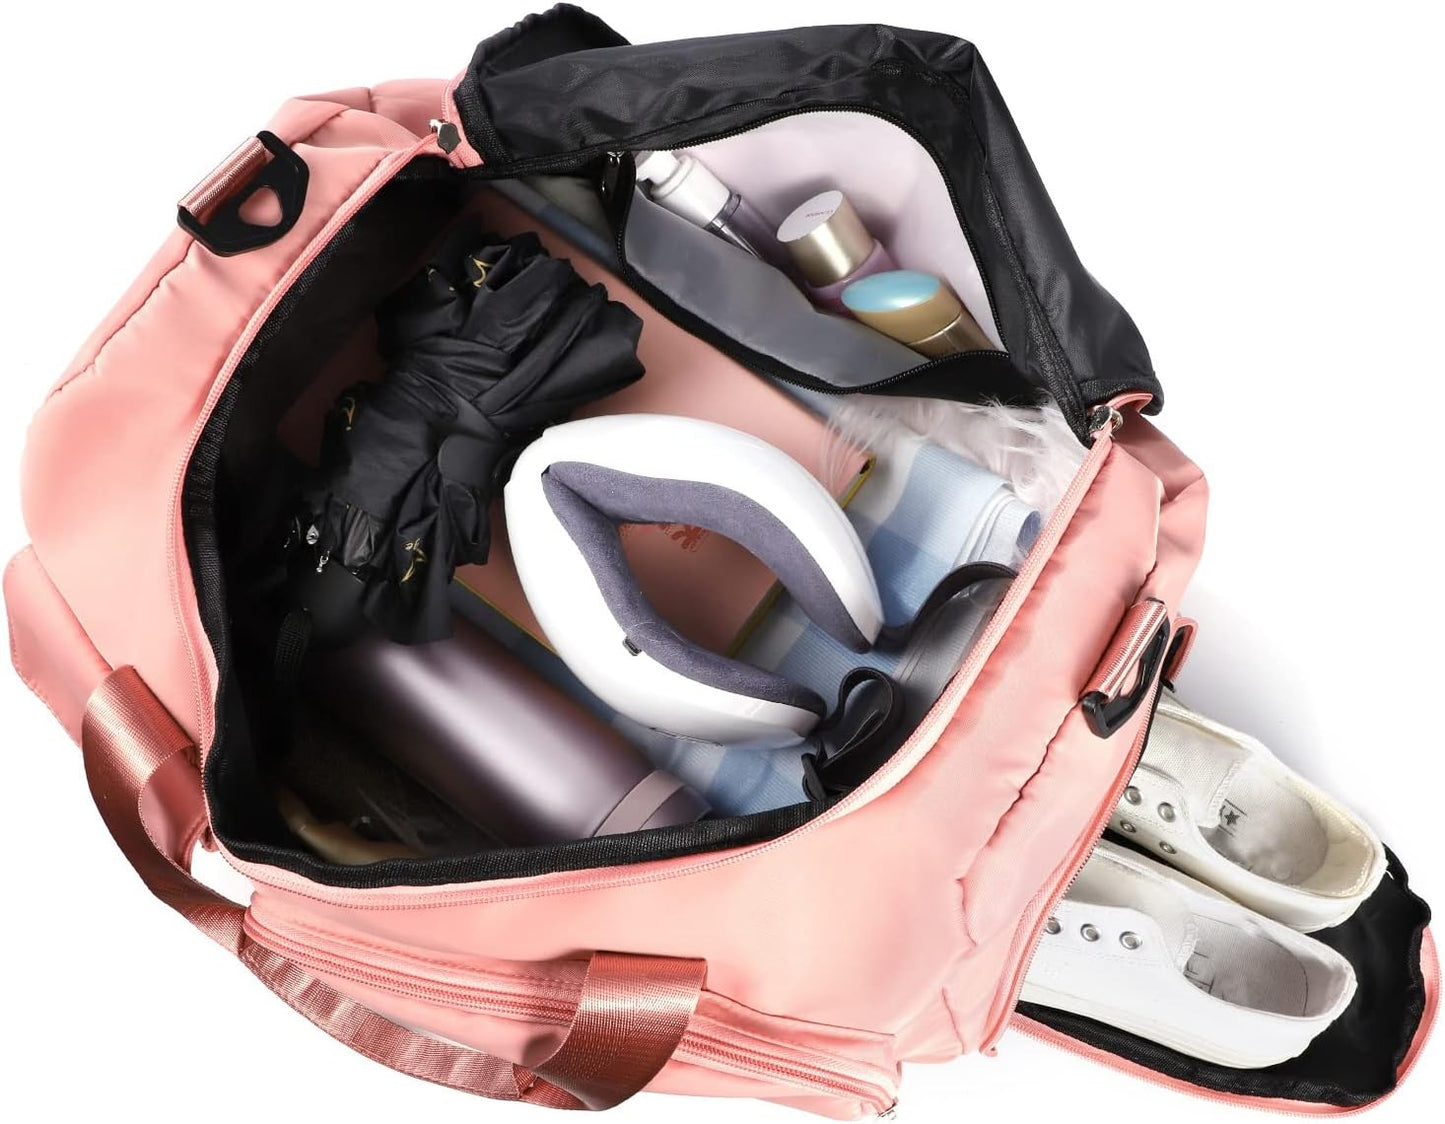 Travel Bag, Sports Duffel Bags Large Gym Bags Foldable Travel Holdalls Portable Carry Luggage Bags Large Capacity Holdall Bags for Women Men with Shoes Compartment(Pink)